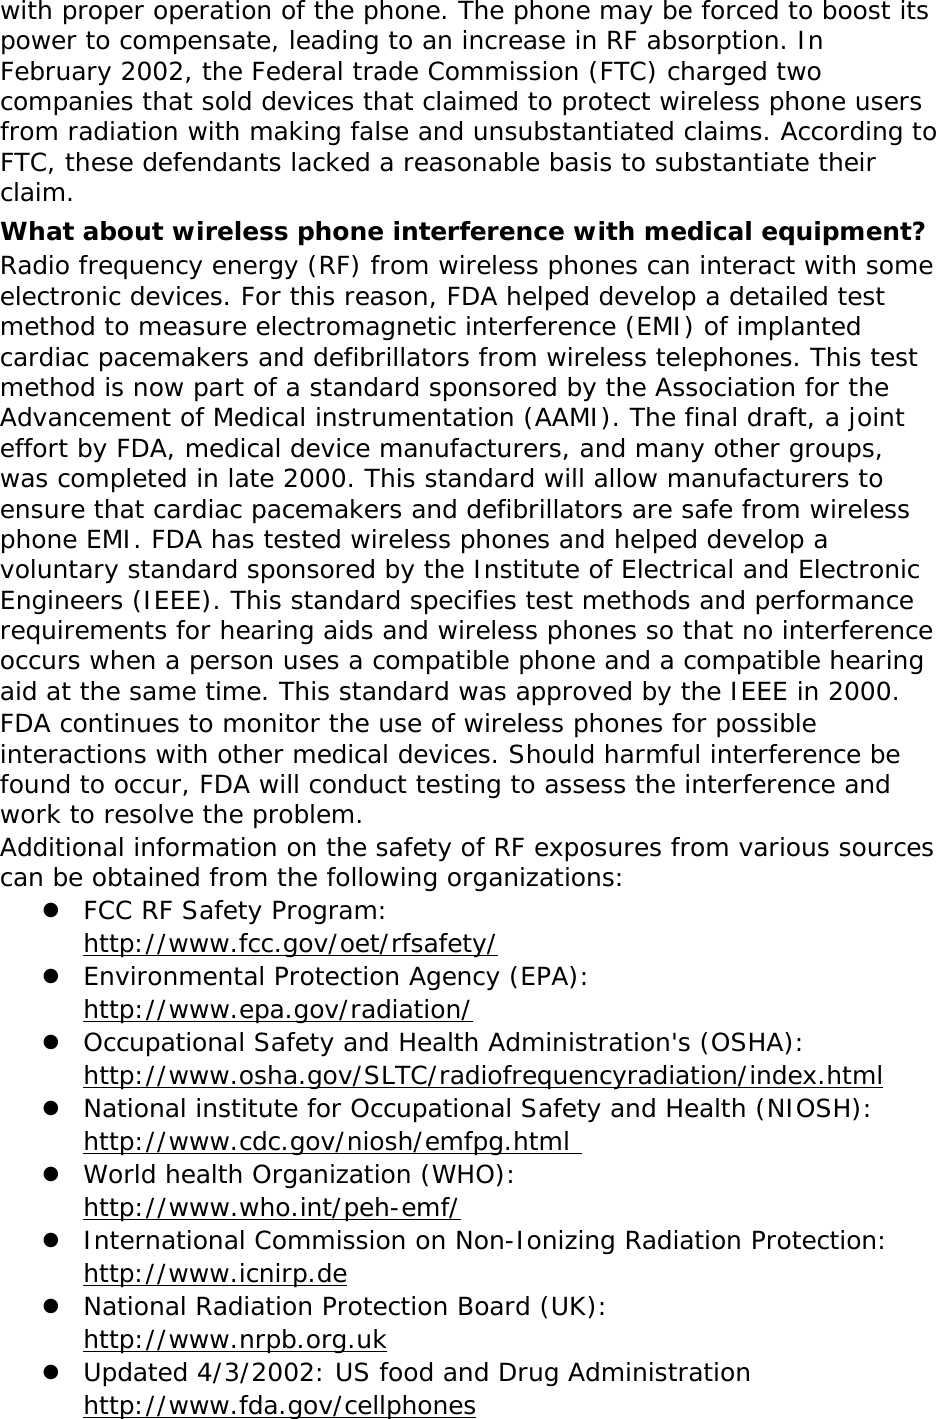   with proper operation of the phone. The phone may be forced to boost its power to compensate, leading to an increase in RF absorption. In February 2002, the Federal trade Commission (FTC) charged two companies that sold devices that claimed to protect wireless phone users from radiation with making false and unsubstantiated claims. According to FTC, these defendants lacked a reasonable basis to substantiate their claim. What about wireless phone interference with medical equipment? Radio frequency energy (RF) from wireless phones can interact with some electronic devices. For this reason, FDA helped develop a detailed test method to measure electromagnetic interference (EMI) of implanted cardiac pacemakers and defibrillators from wireless telephones. This test method is now part of a standard sponsored by the Association for the Advancement of Medical instrumentation (AAMI). The final draft, a joint effort by FDA, medical device manufacturers, and many other groups, was completed in late 2000. This standard will allow manufacturers to ensure that cardiac pacemakers and defibrillators are safe from wireless phone EMI. FDA has tested wireless phones and helped develop a voluntary standard sponsored by the Institute of Electrical and Electronic Engineers (IEEE). This standard specifies test methods and performance requirements for hearing aids and wireless phones so that no interference occurs when a person uses a compatible phone and a compatible hearing aid at the same time. This standard was approved by the IEEE in 2000. FDA continues to monitor the use of wireless phones for possible interactions with other medical devices. Should harmful interference be found to occur, FDA will conduct testing to assess the interference and work to resolve the problem. Additional information on the safety of RF exposures from various sources can be obtained from the following organizations:  FCC RF Safety Program:  http://www.fcc.gov/oet/rfsafety/  Environmental Protection Agency (EPA):  http://www.epa.gov/radiation/  Occupational Safety and Health Administration&apos;s (OSHA):        http://www.osha.gov/SLTC/radiofrequencyradiation/index.html  National institute for Occupational Safety and Health (NIOSH):  http://www.cdc.gov/niosh/emfpg.html   World health Organization (WHO):  http://www.who.int/peh-emf/  International Commission on Non-Ionizing Radiation Protection:  http://www.icnirp.de  National Radiation Protection Board (UK):  http://www.nrpb.org.uk  Updated 4/3/2002: US food and Drug Administration  http://www.fda.gov/cellphones 